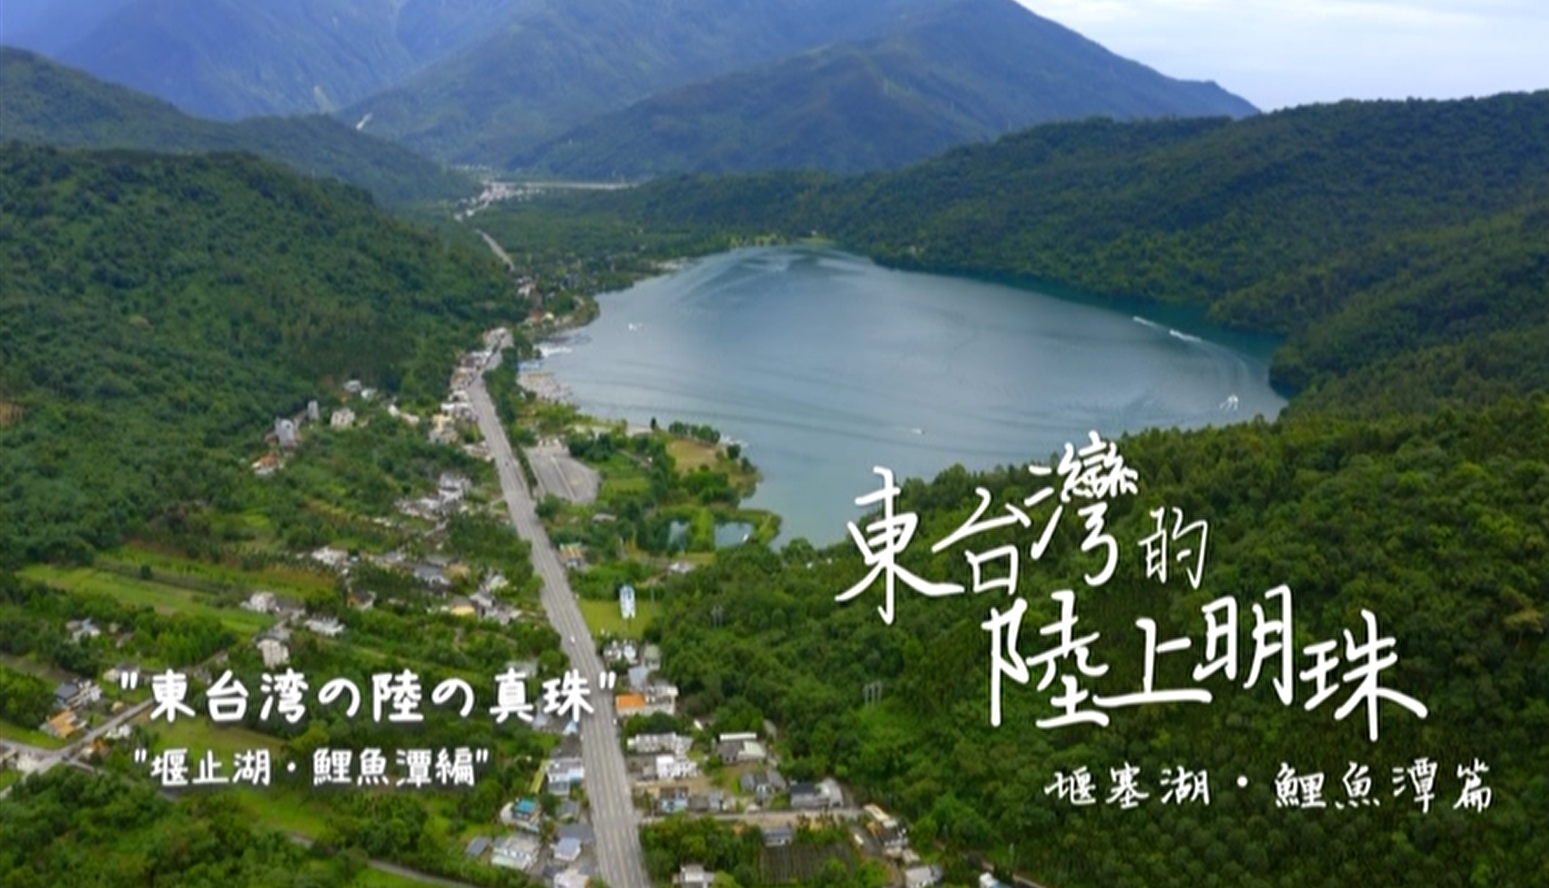 East Rift Valley Geological Landscape Tourism Promotional Video：The Land Pearl of Eastern Taiwan: Liyu Lake, Barrier Lake Collection Japanese